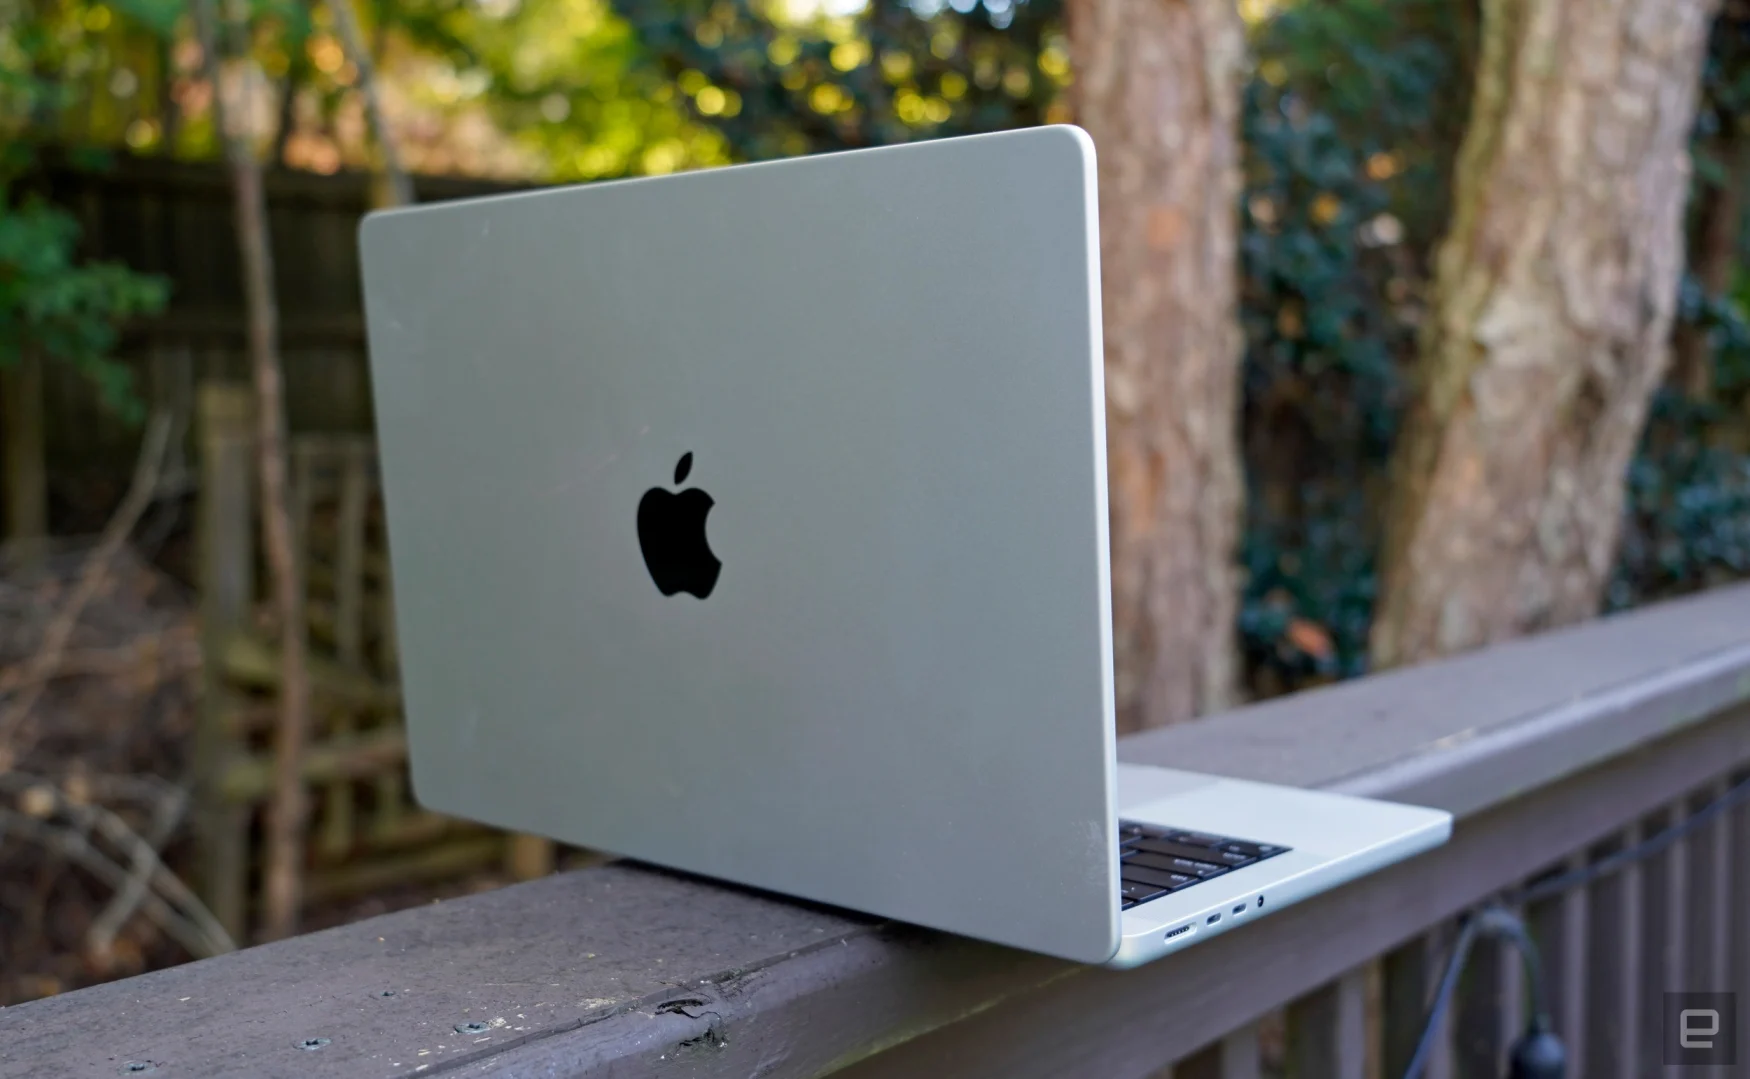 Apple MacBook Pro 14-inch from the rear, showing off the Apple logo.